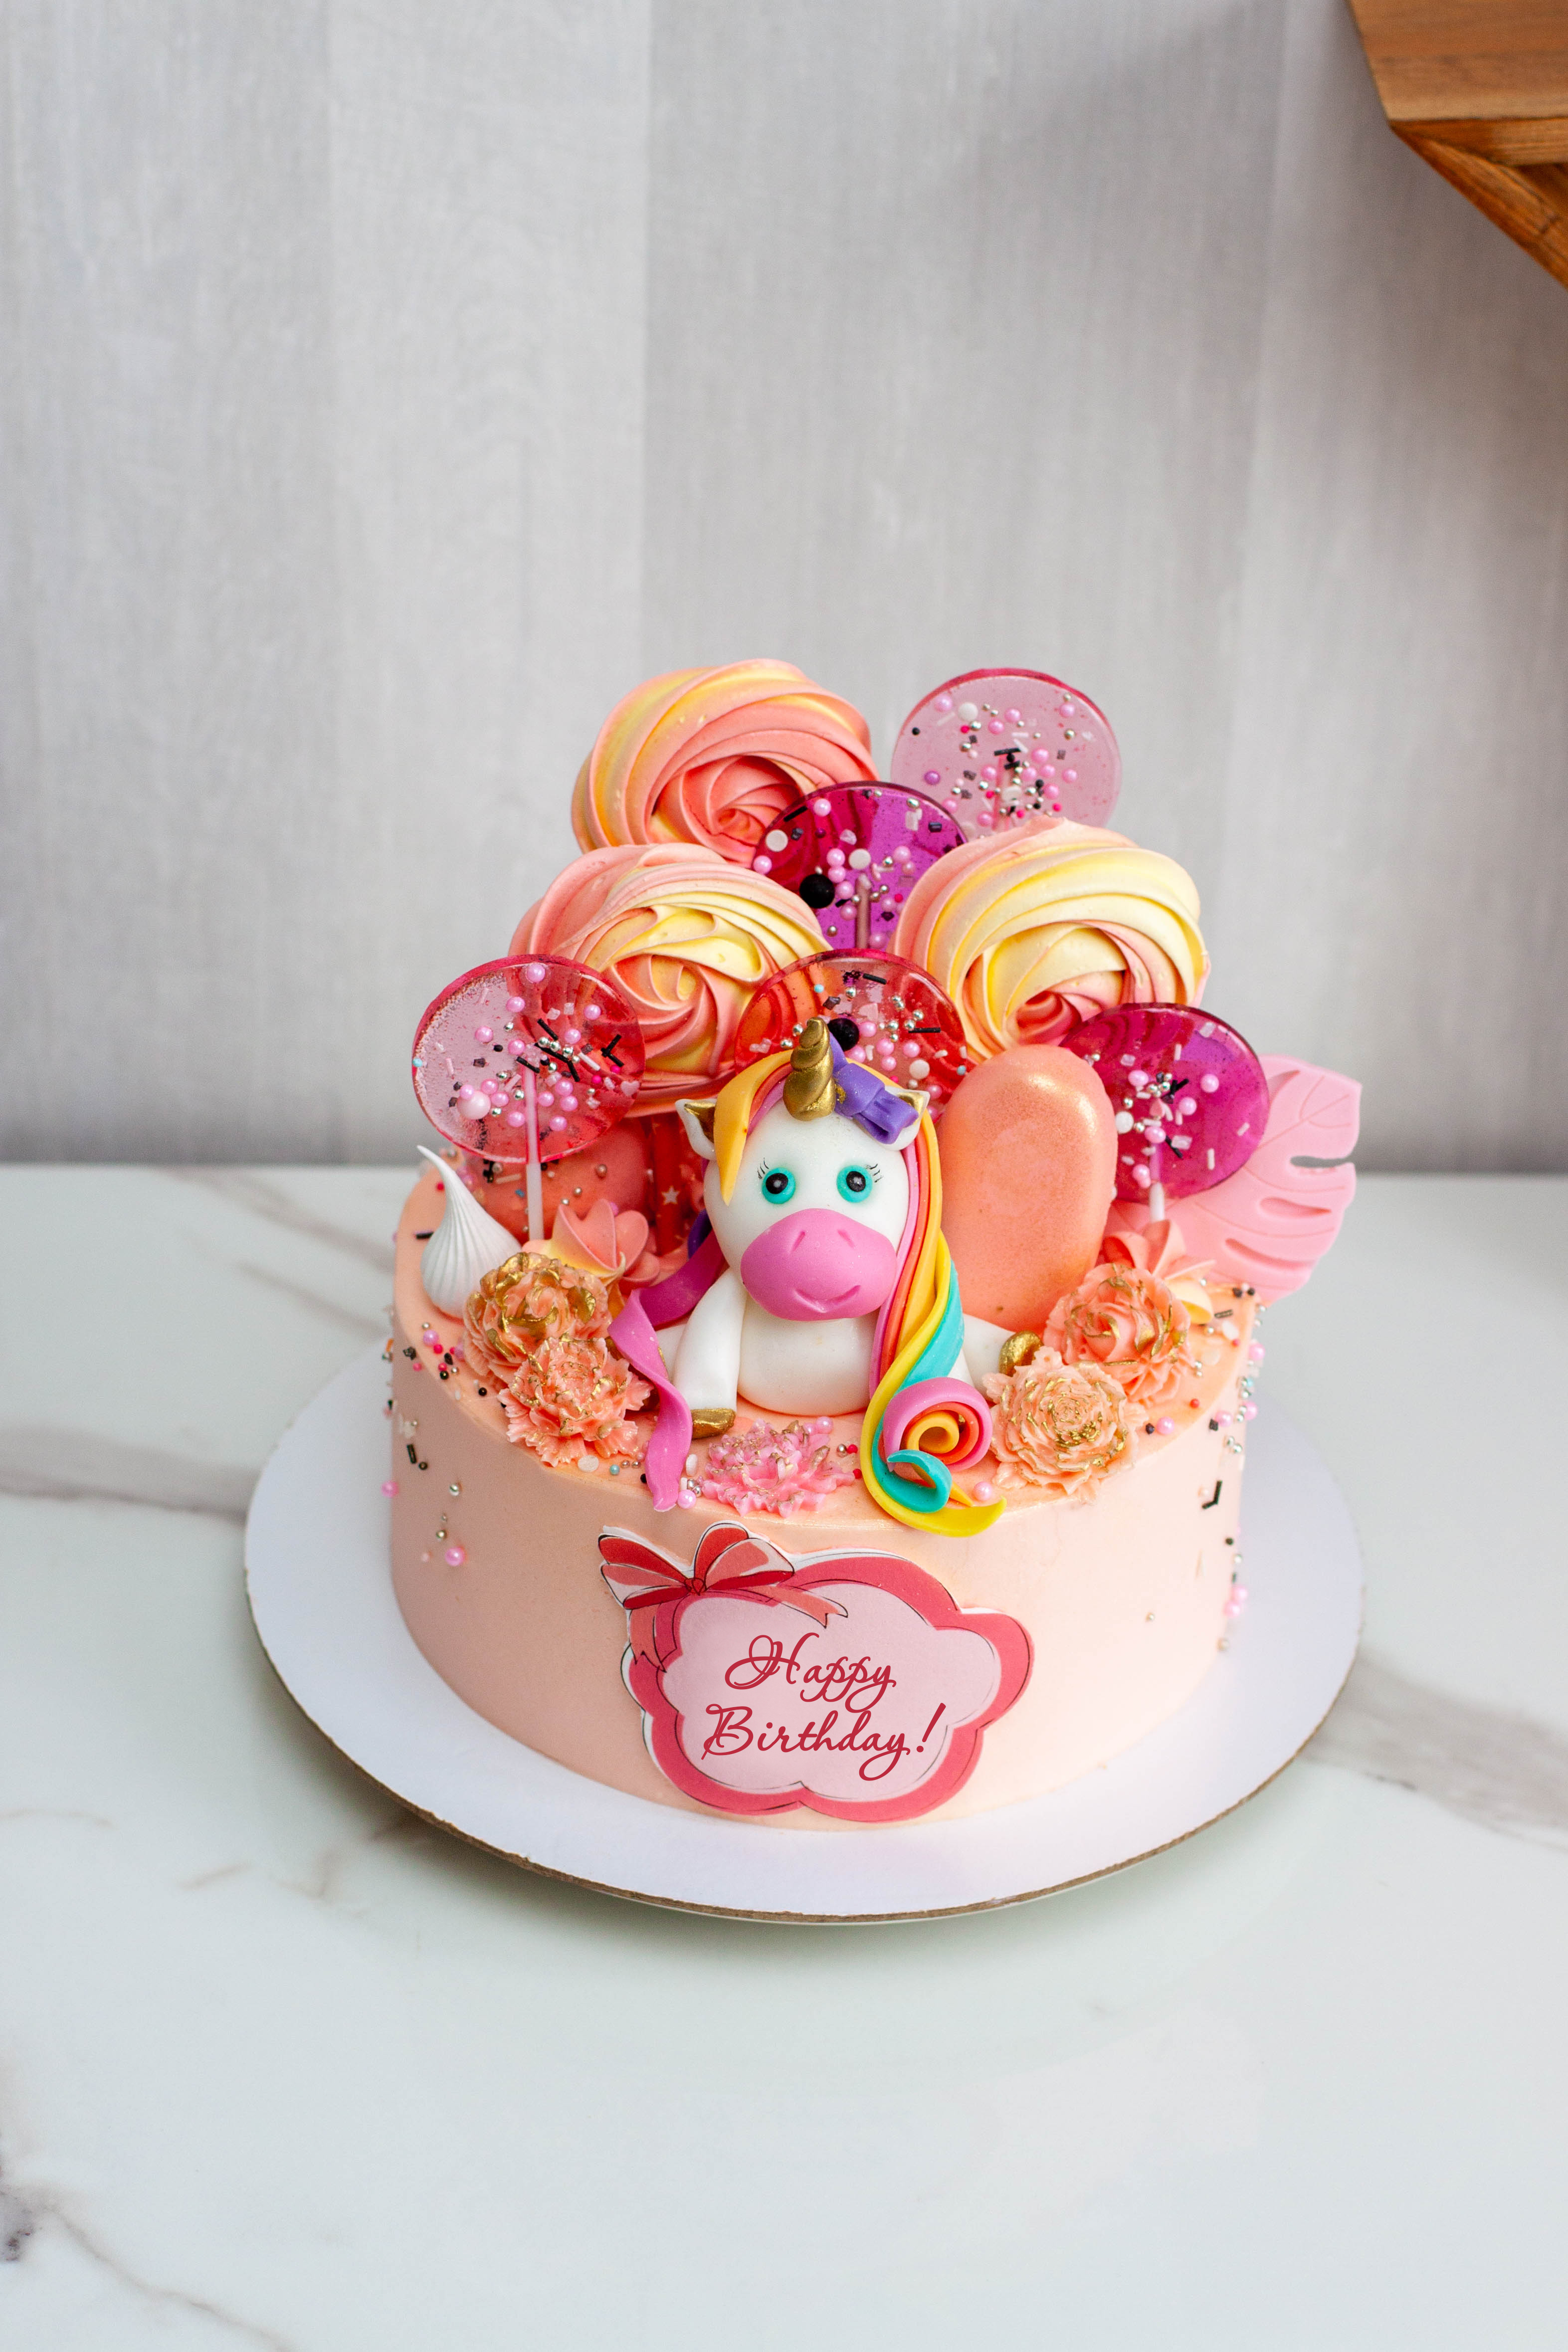 Birthday cake with cute fondant unicorn, lollipos, meringues, popsicles and chocolate flowers for a girl or a baby. Text Happy Birthday | Source: Getty Images